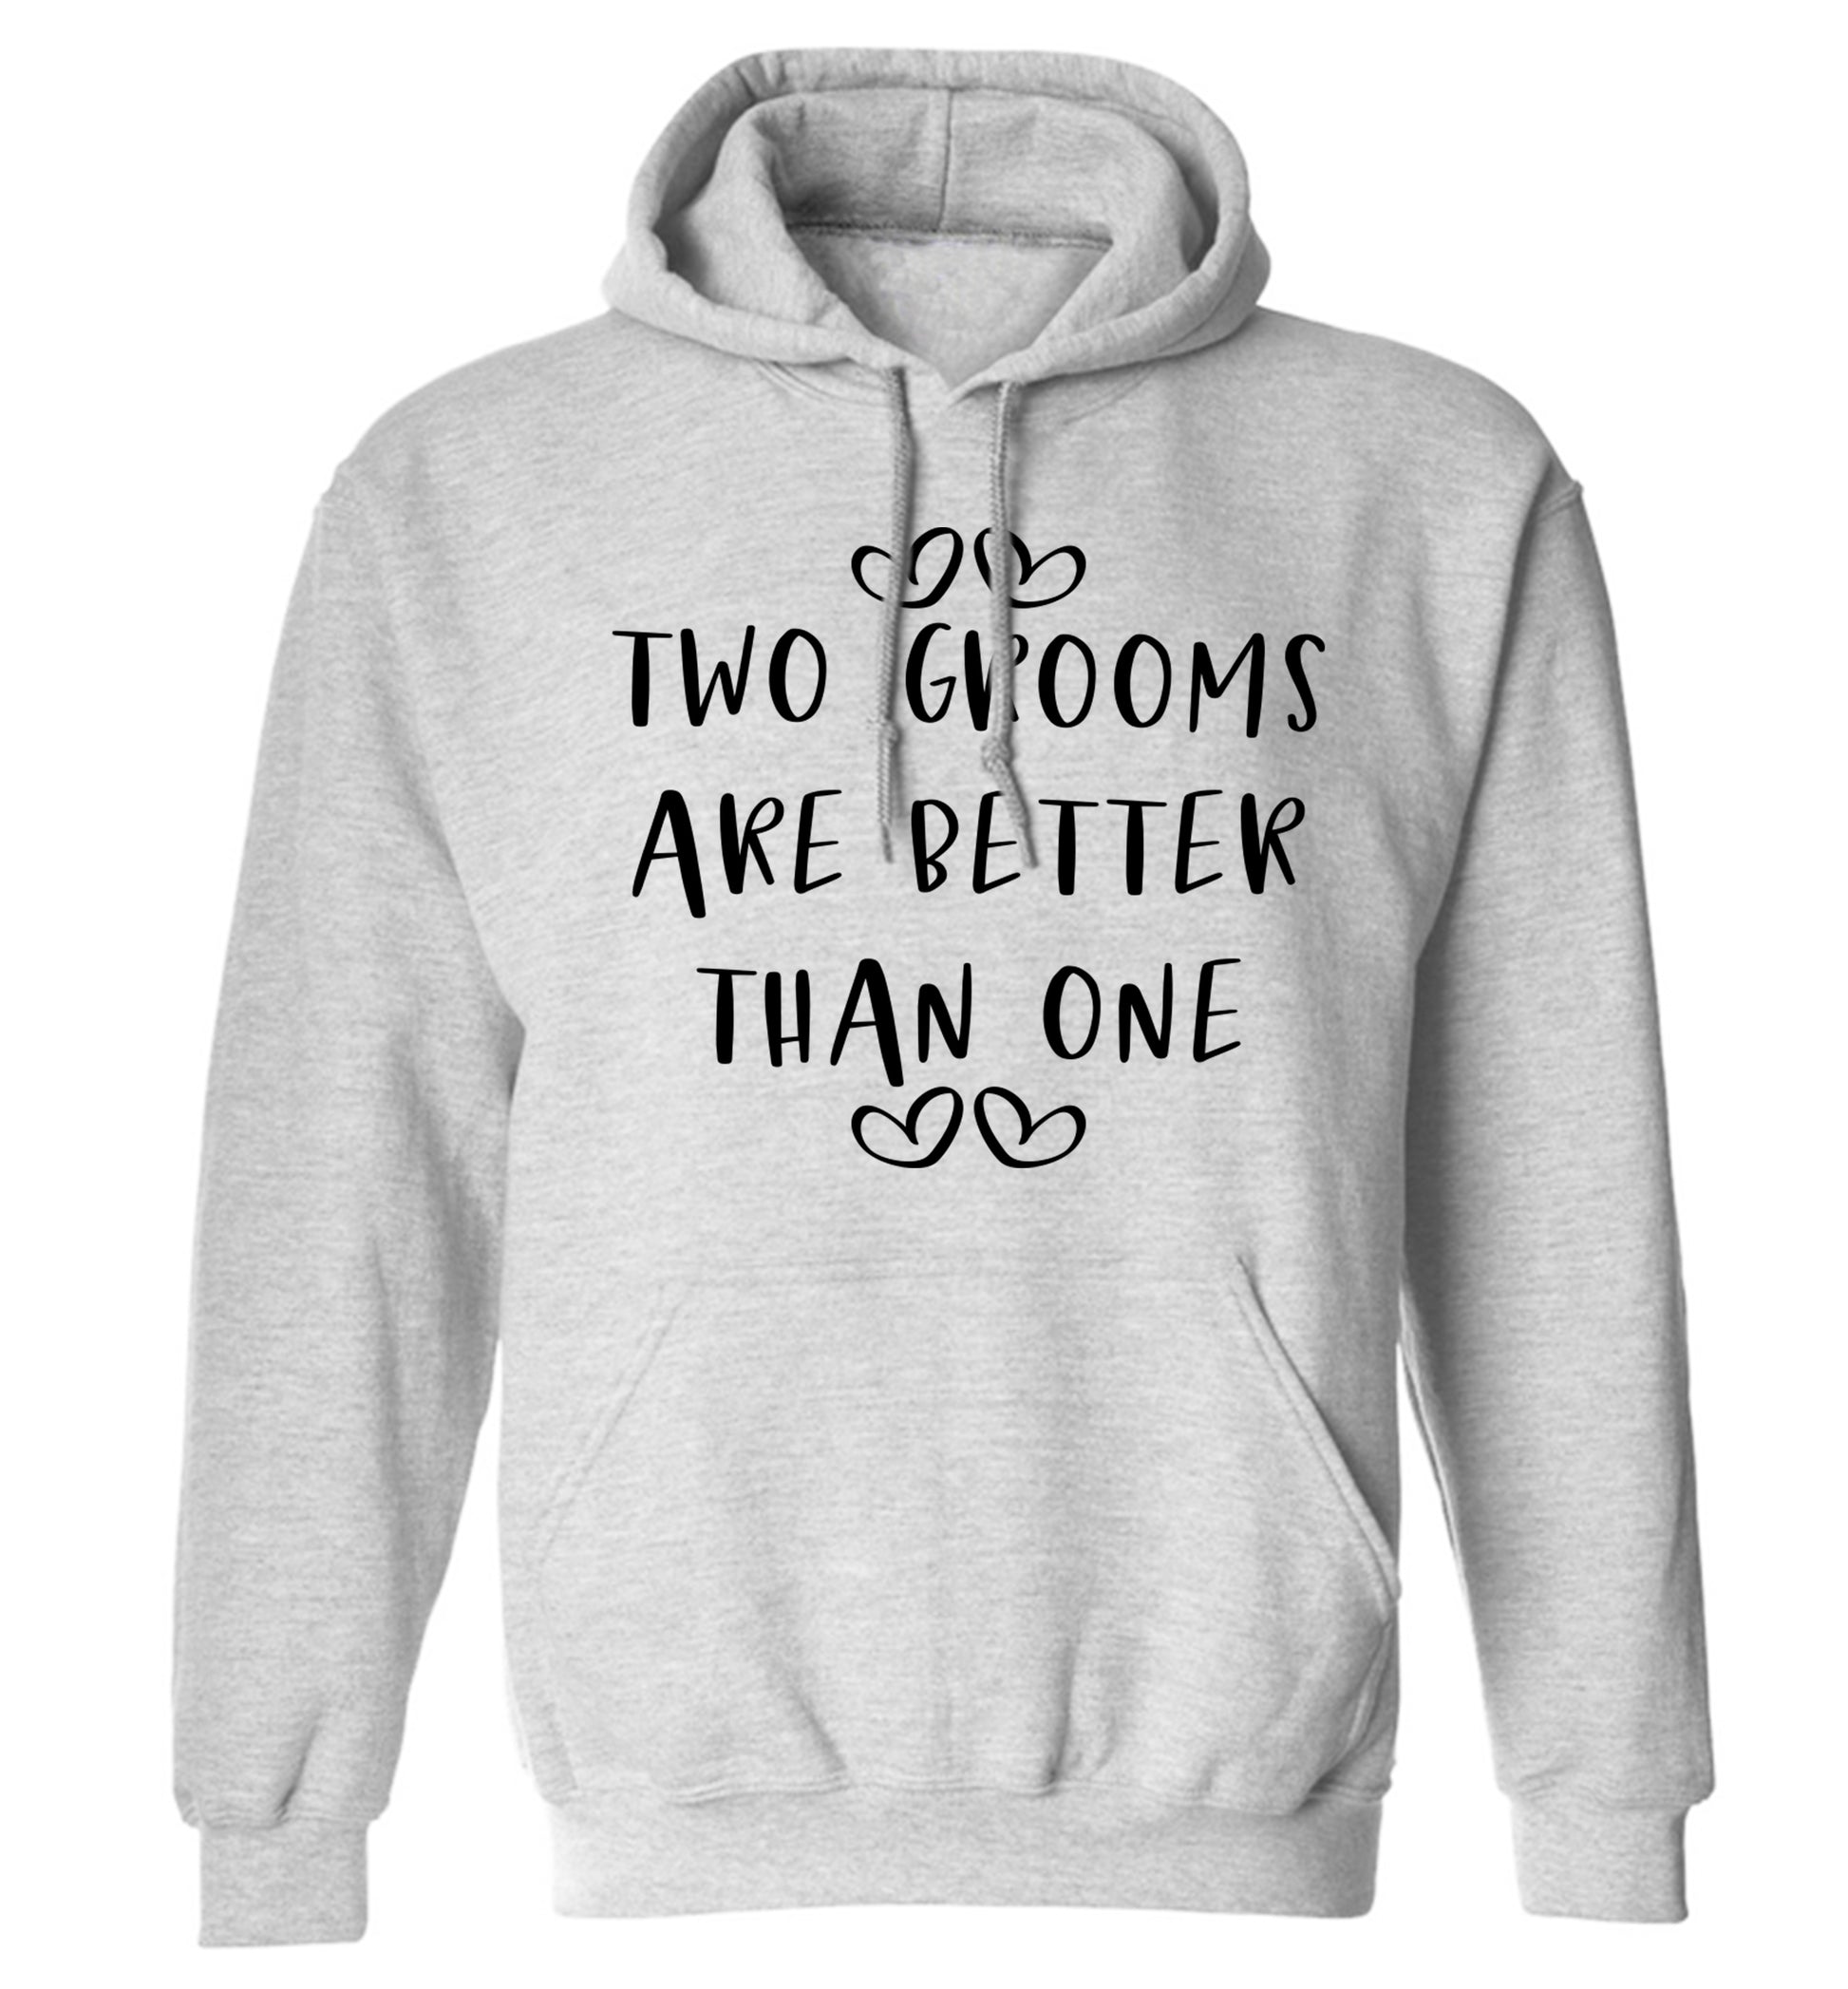 Two grooms are better than one adults unisex grey hoodie 2XL